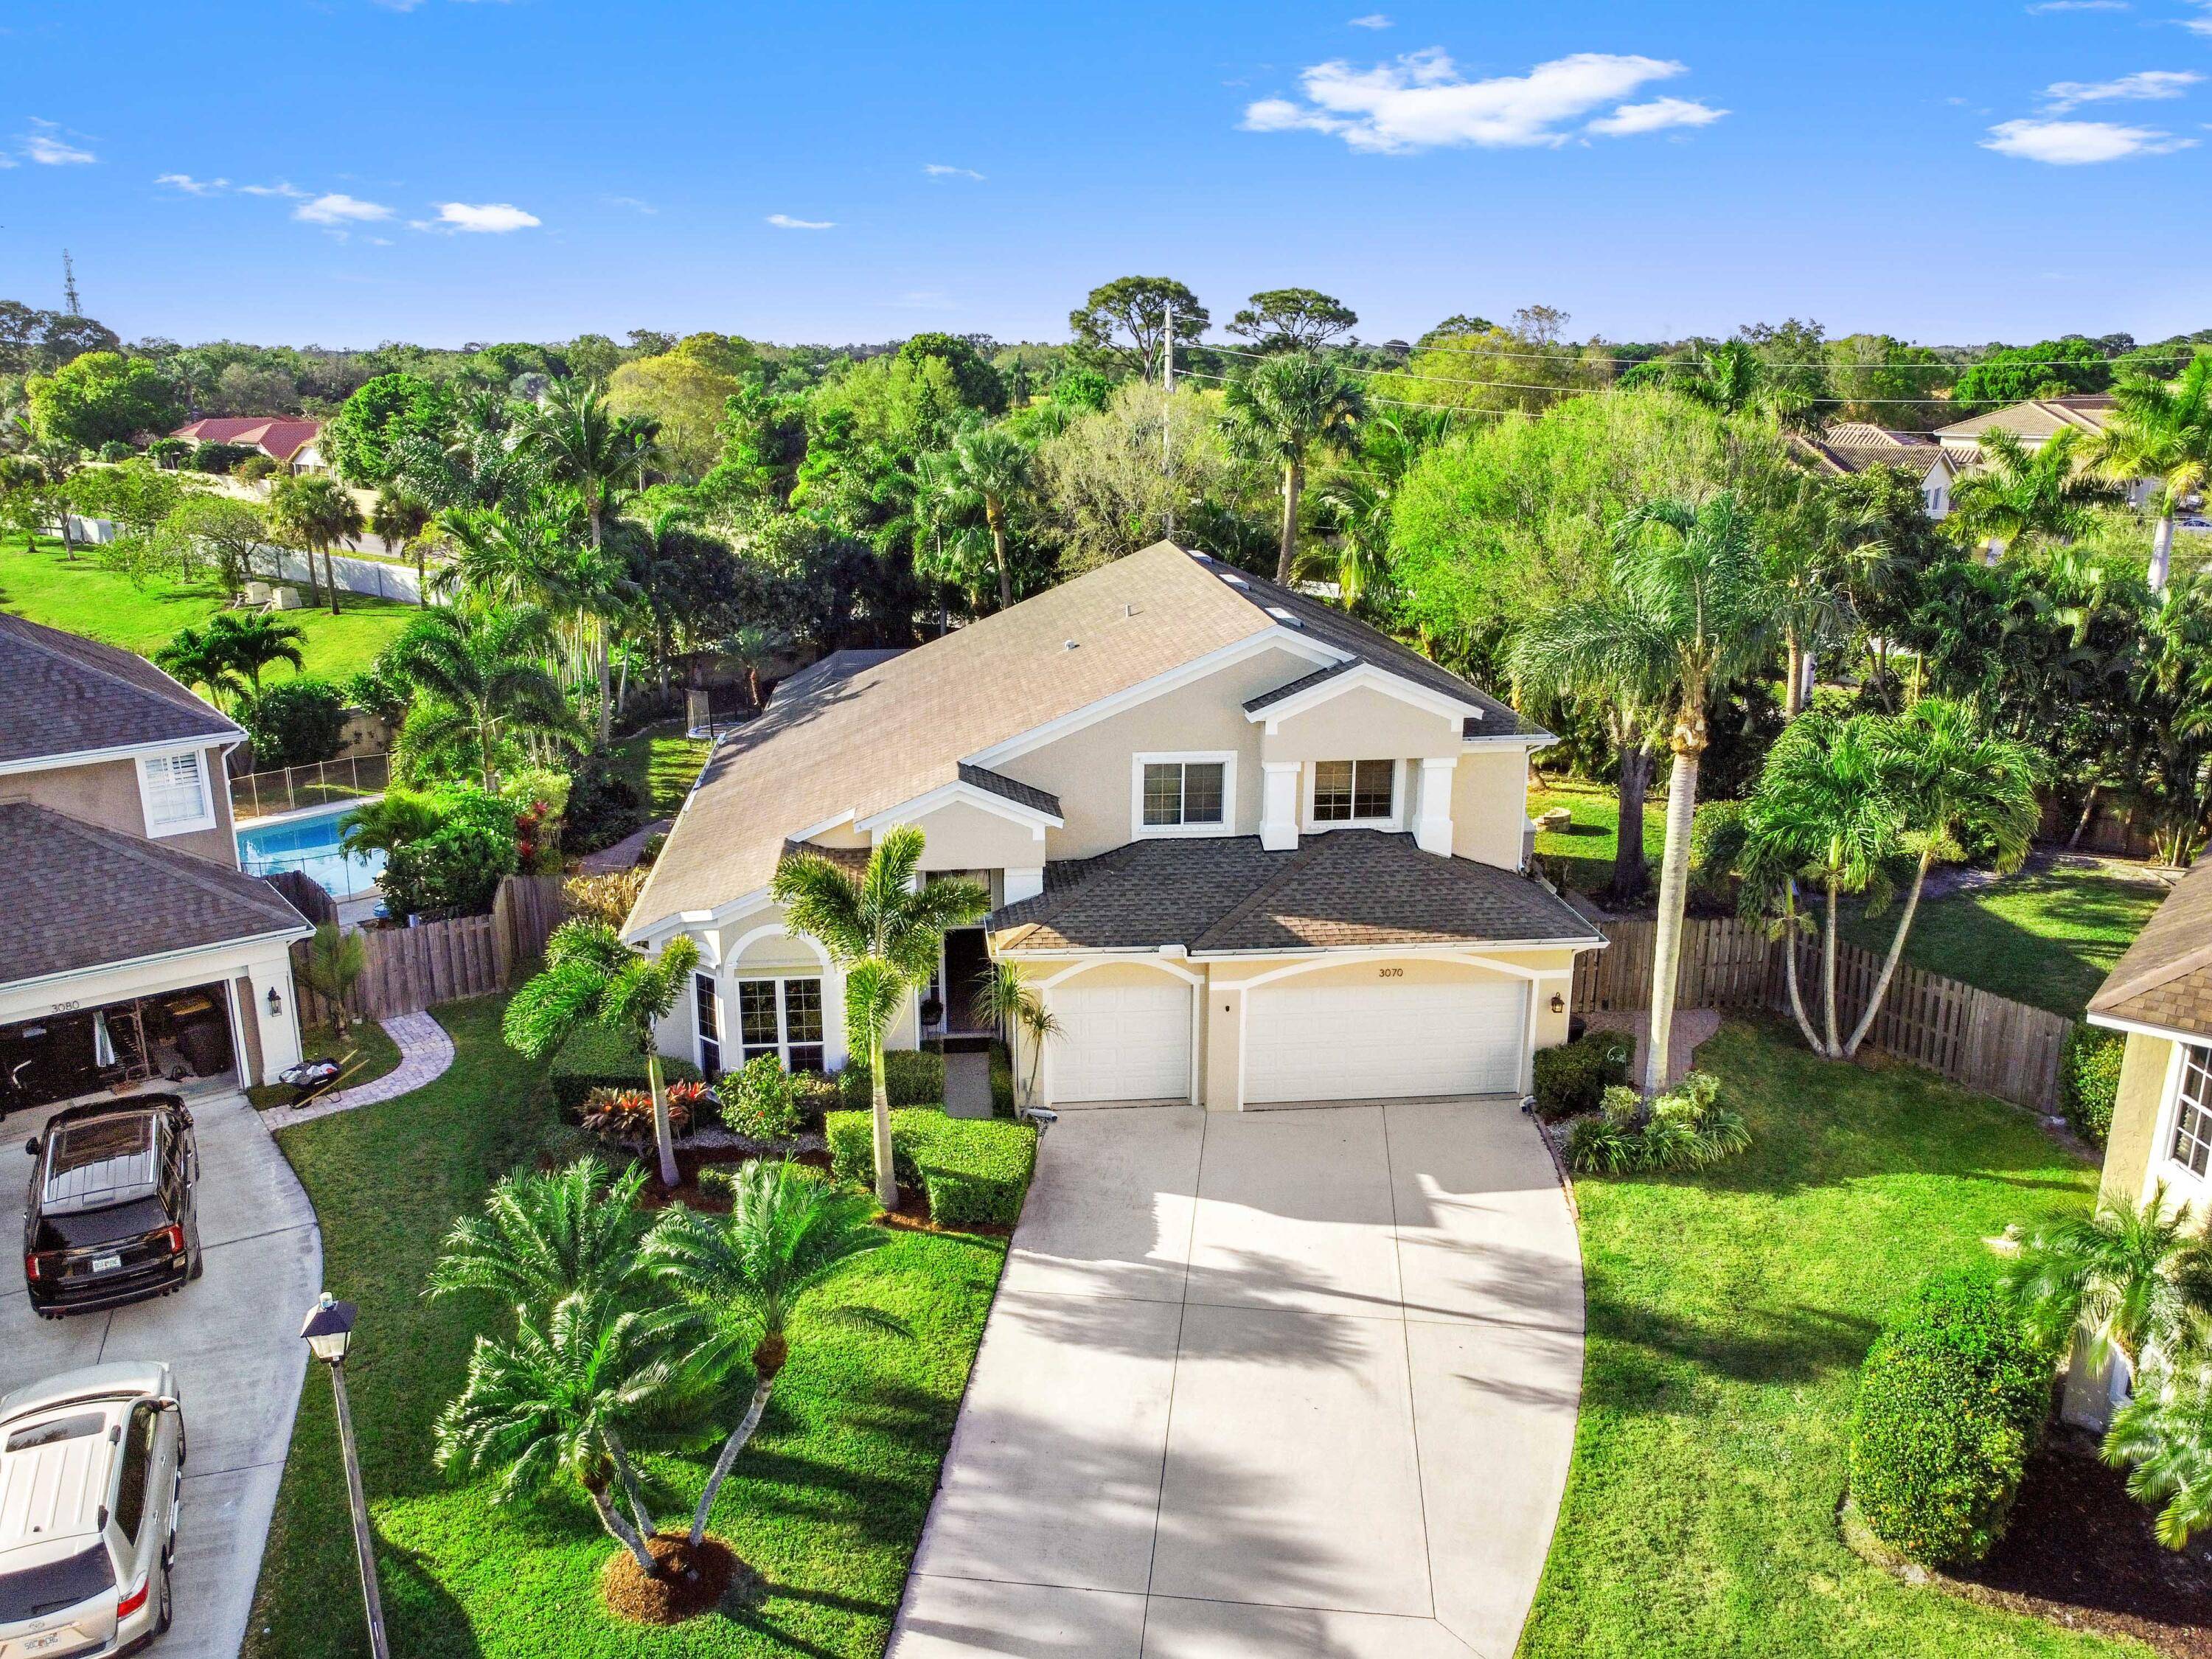 Welcome home ! This luxurious, pool home situated in the heart of Palm City within the highly coveted Islesworth community and in an A RATED MARTIN COUNTY SCHOOL DISTRICT has ...